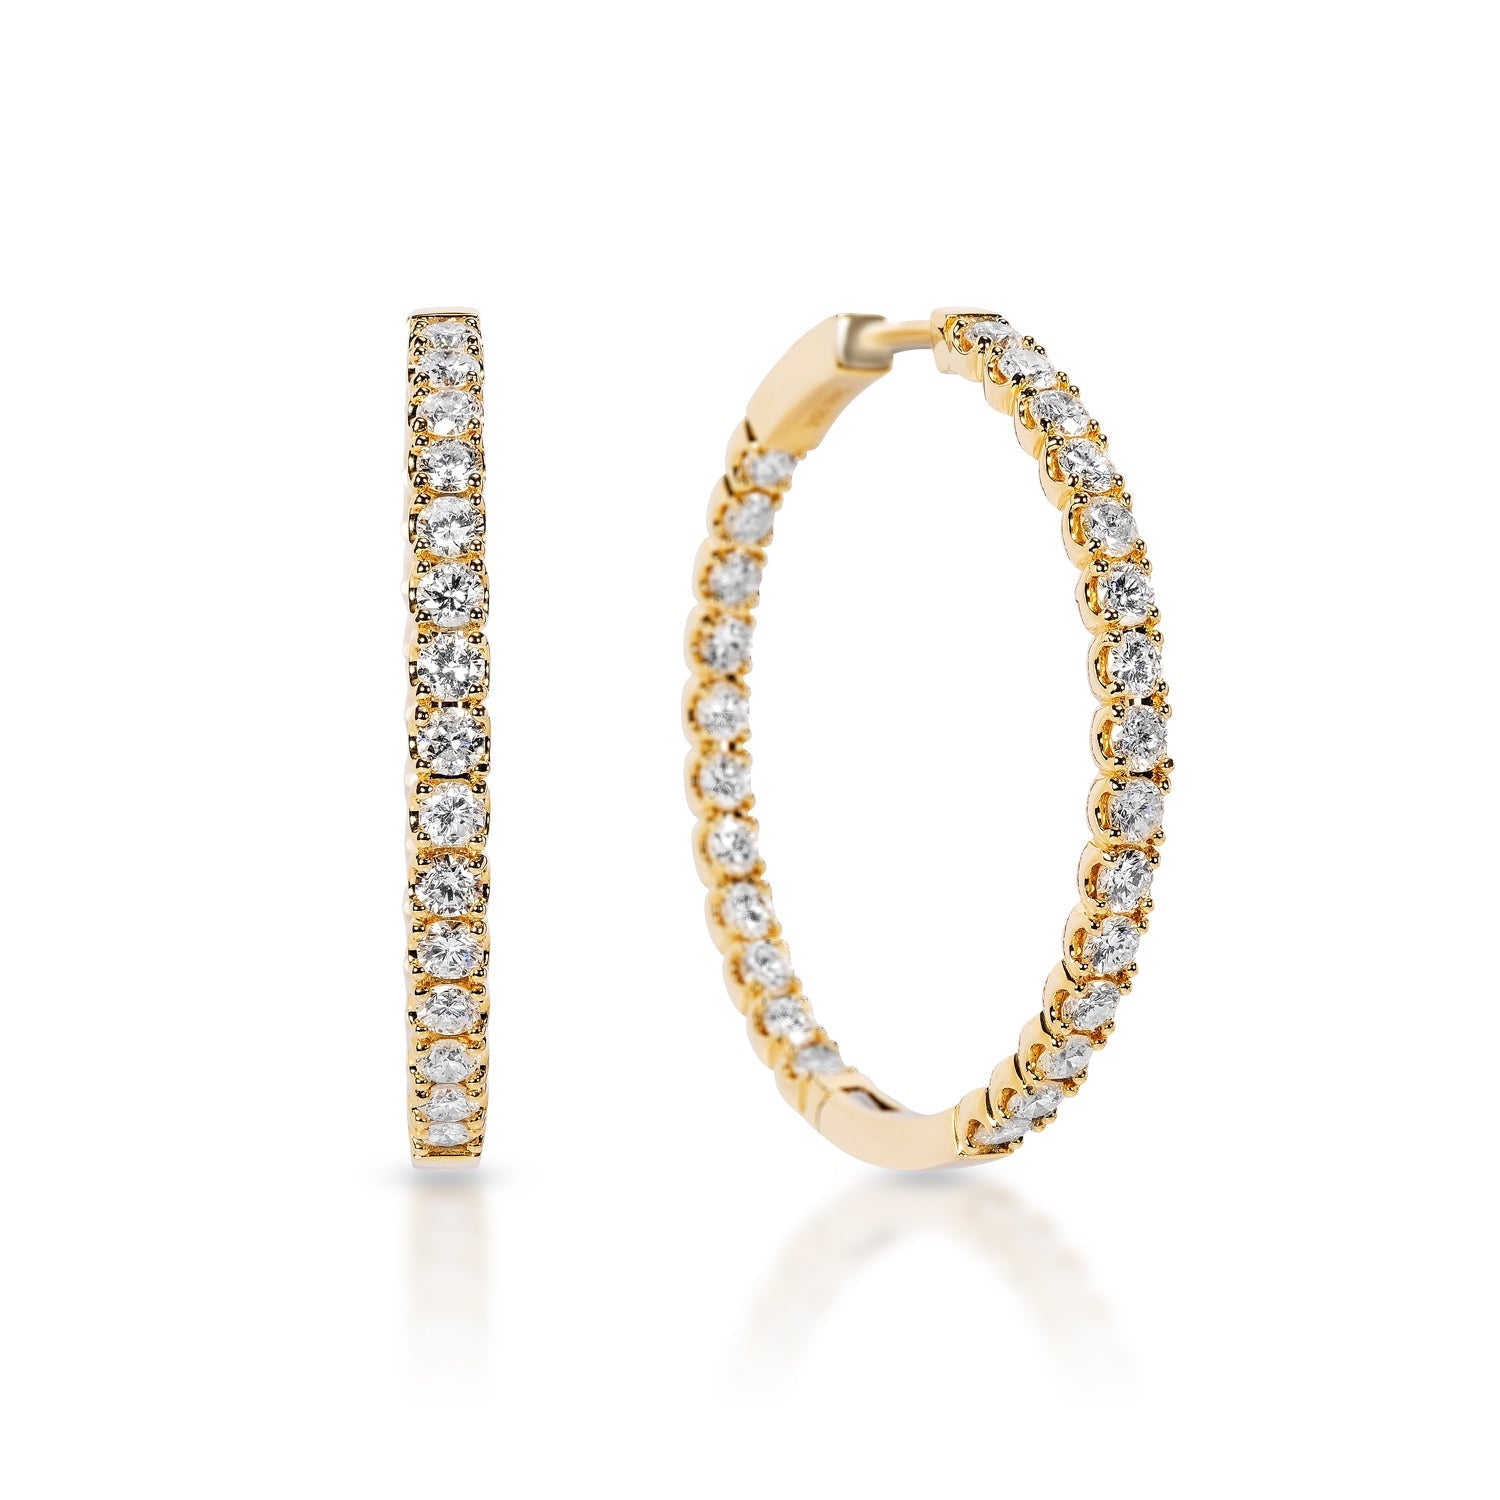 Zara 4 Carat Round Brilliant Diamond Hoop Earrings in 14k Yellow Gold Front and Side View